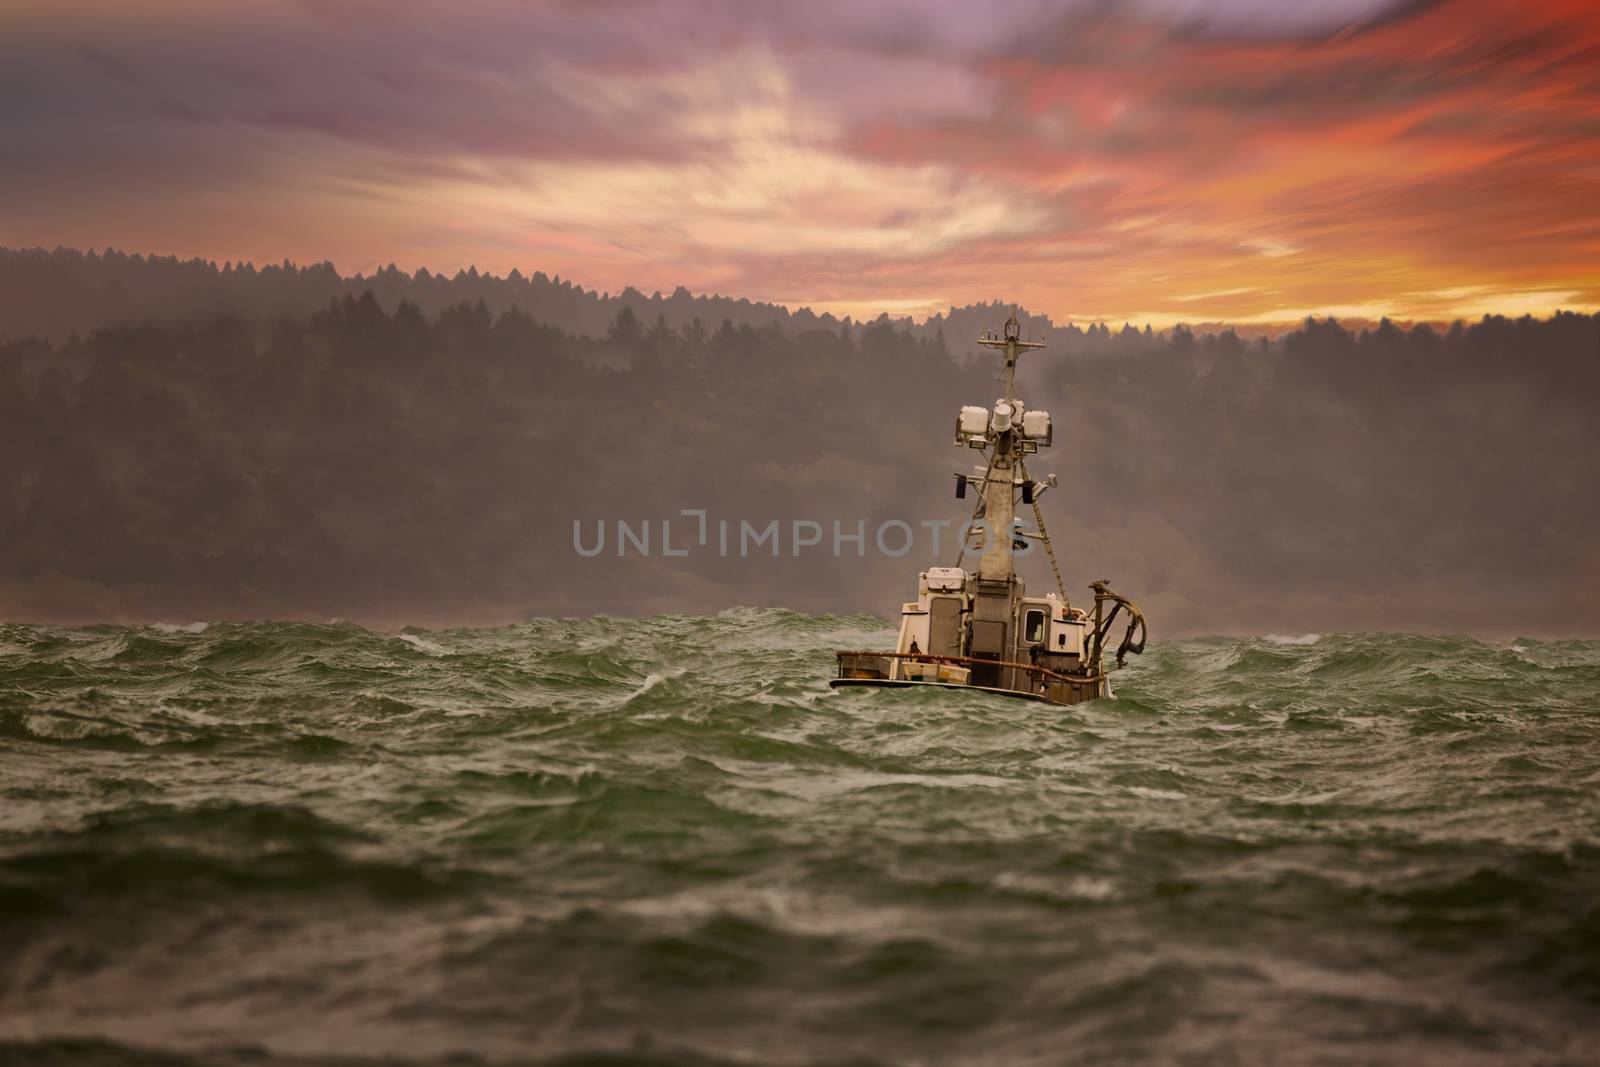 Fishing Boat Moored in a Storm at Sunrise by backyard_photography